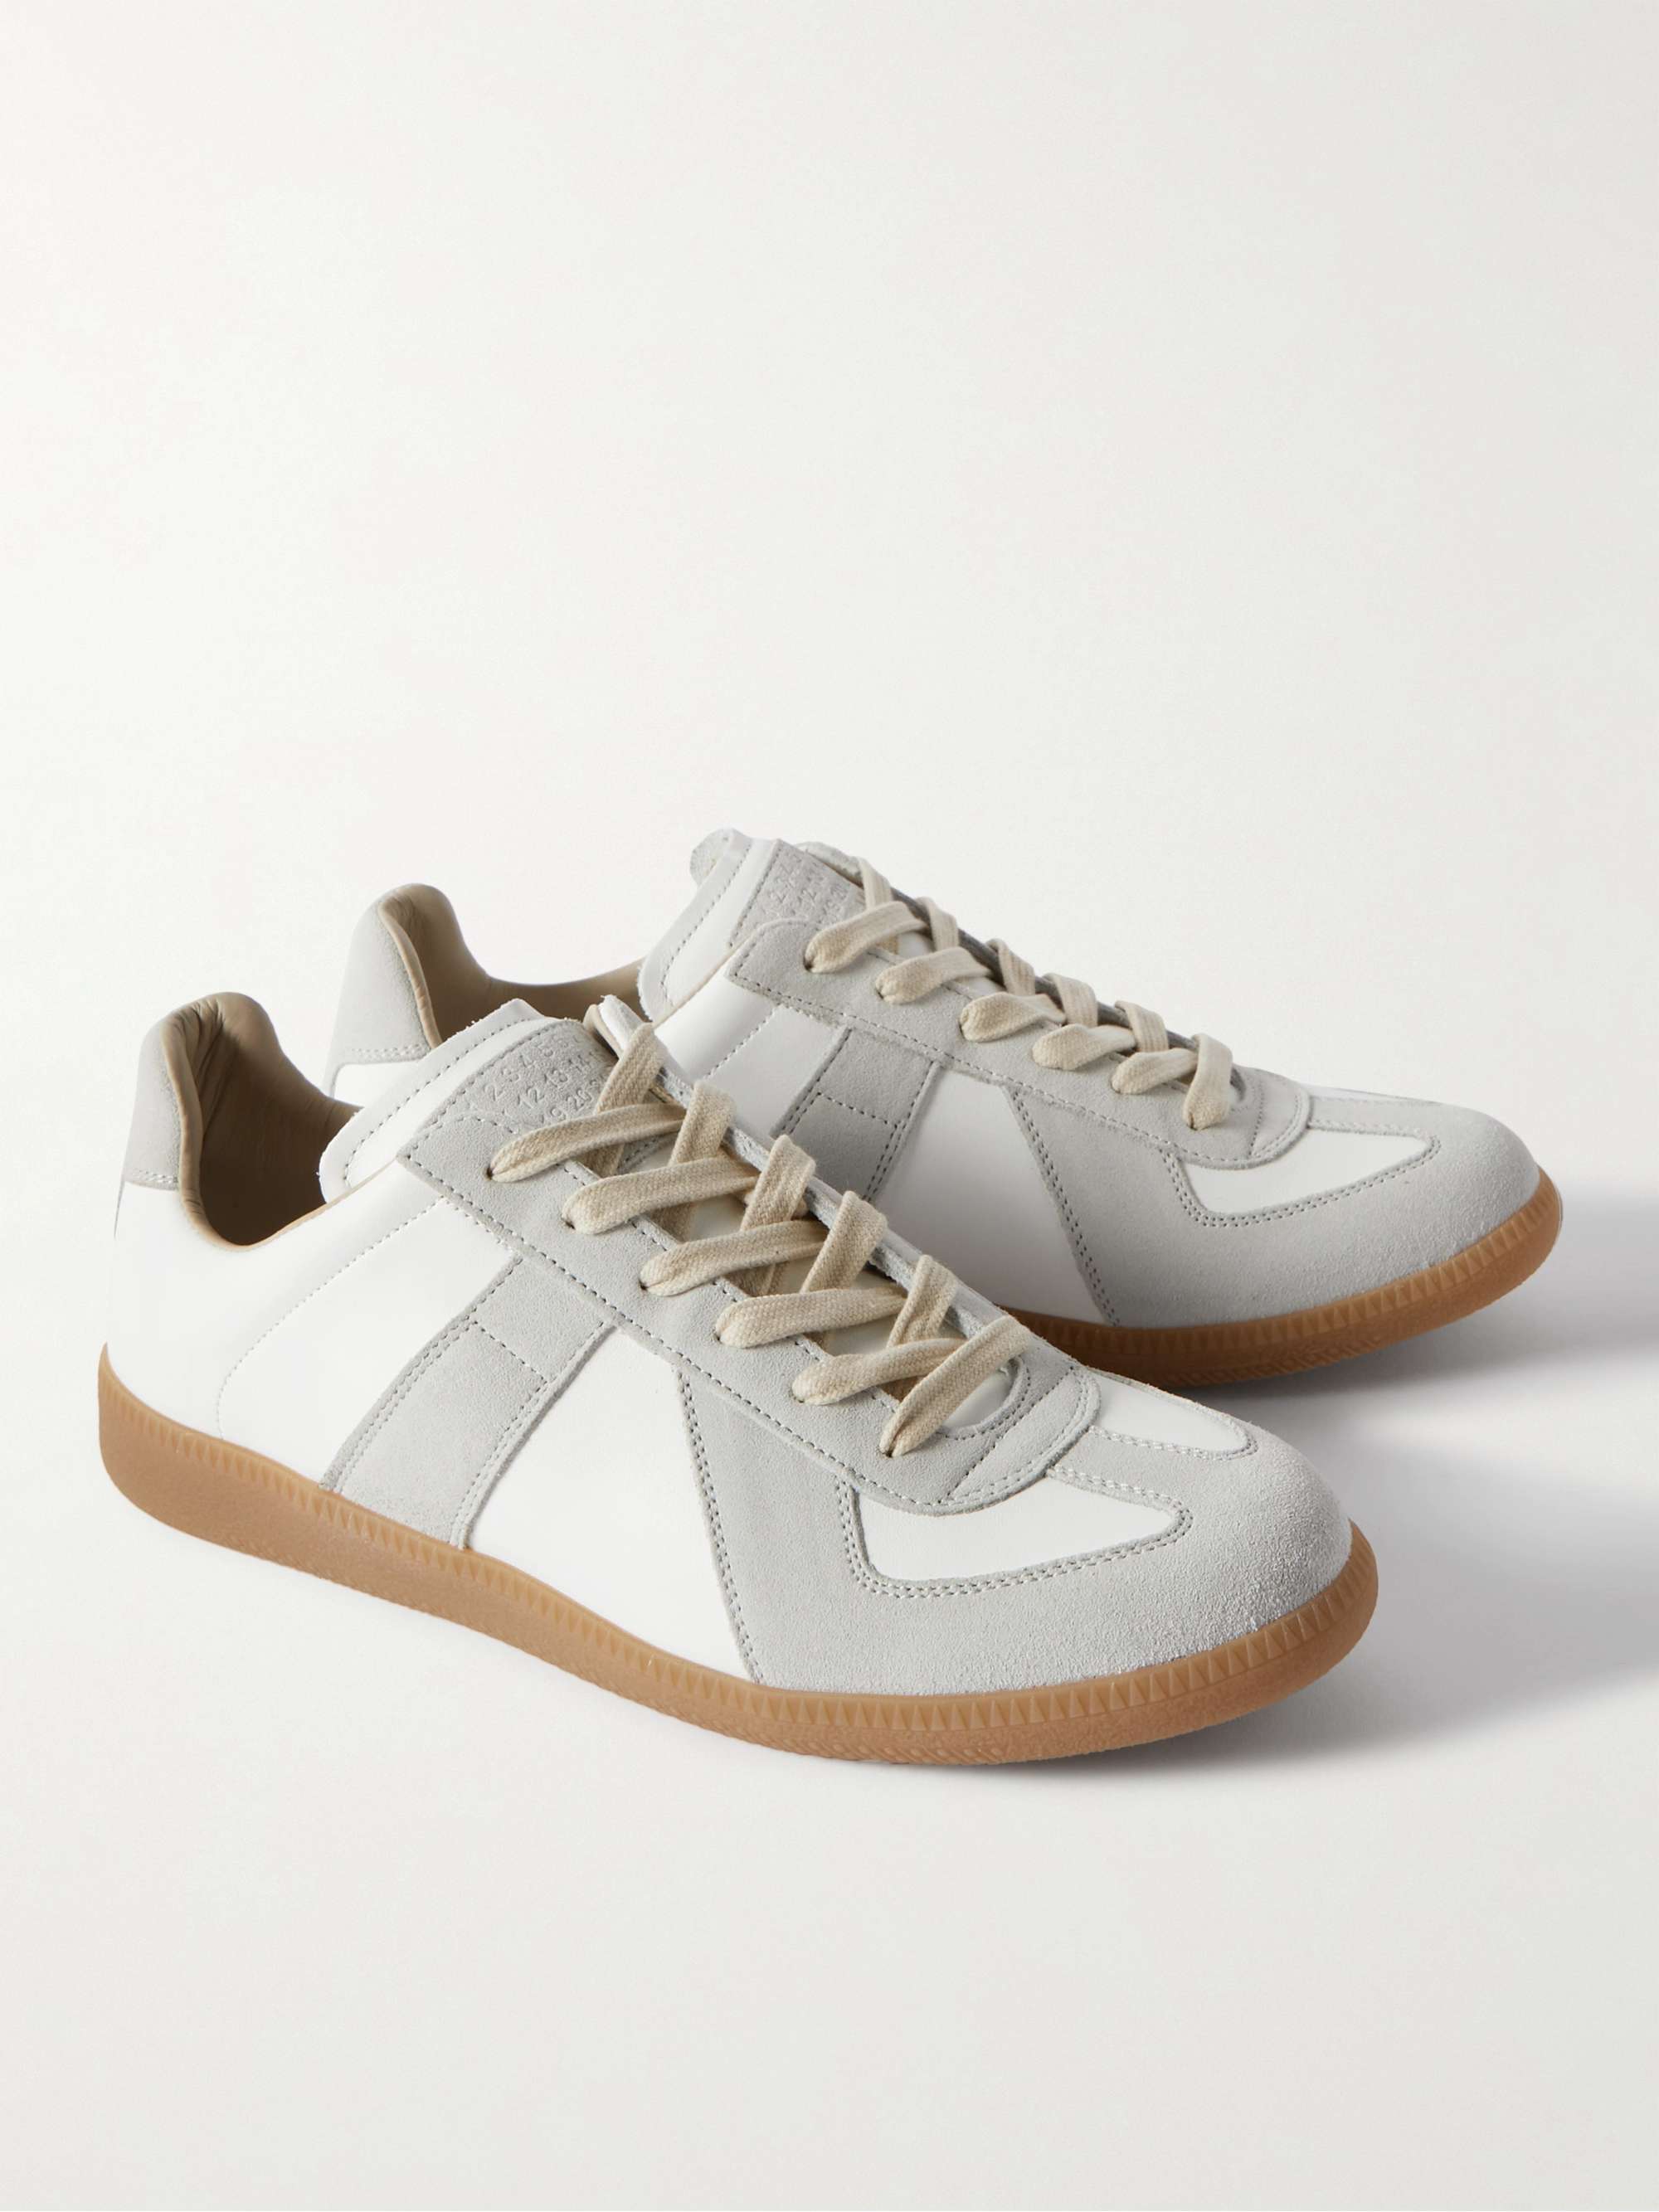 Maison Margiela Sneakers In Suede And Leather in White Save 46% Womens Mens Shoes Mens Trainers Low-top trainers 